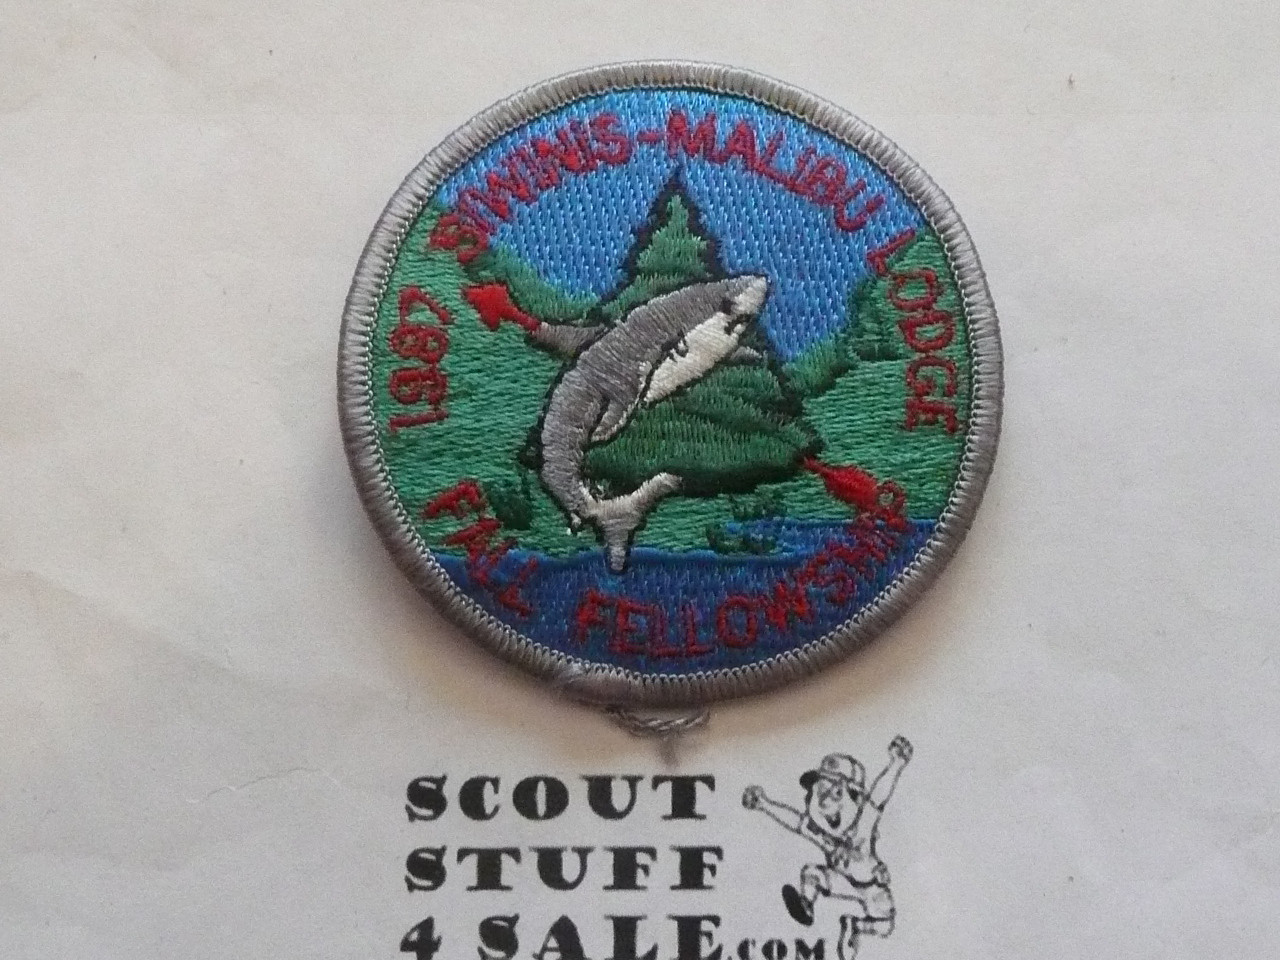 Order of the Arrow Lodge #566 Malibu 1987 Conclave W/Siwinis Patch - Scout